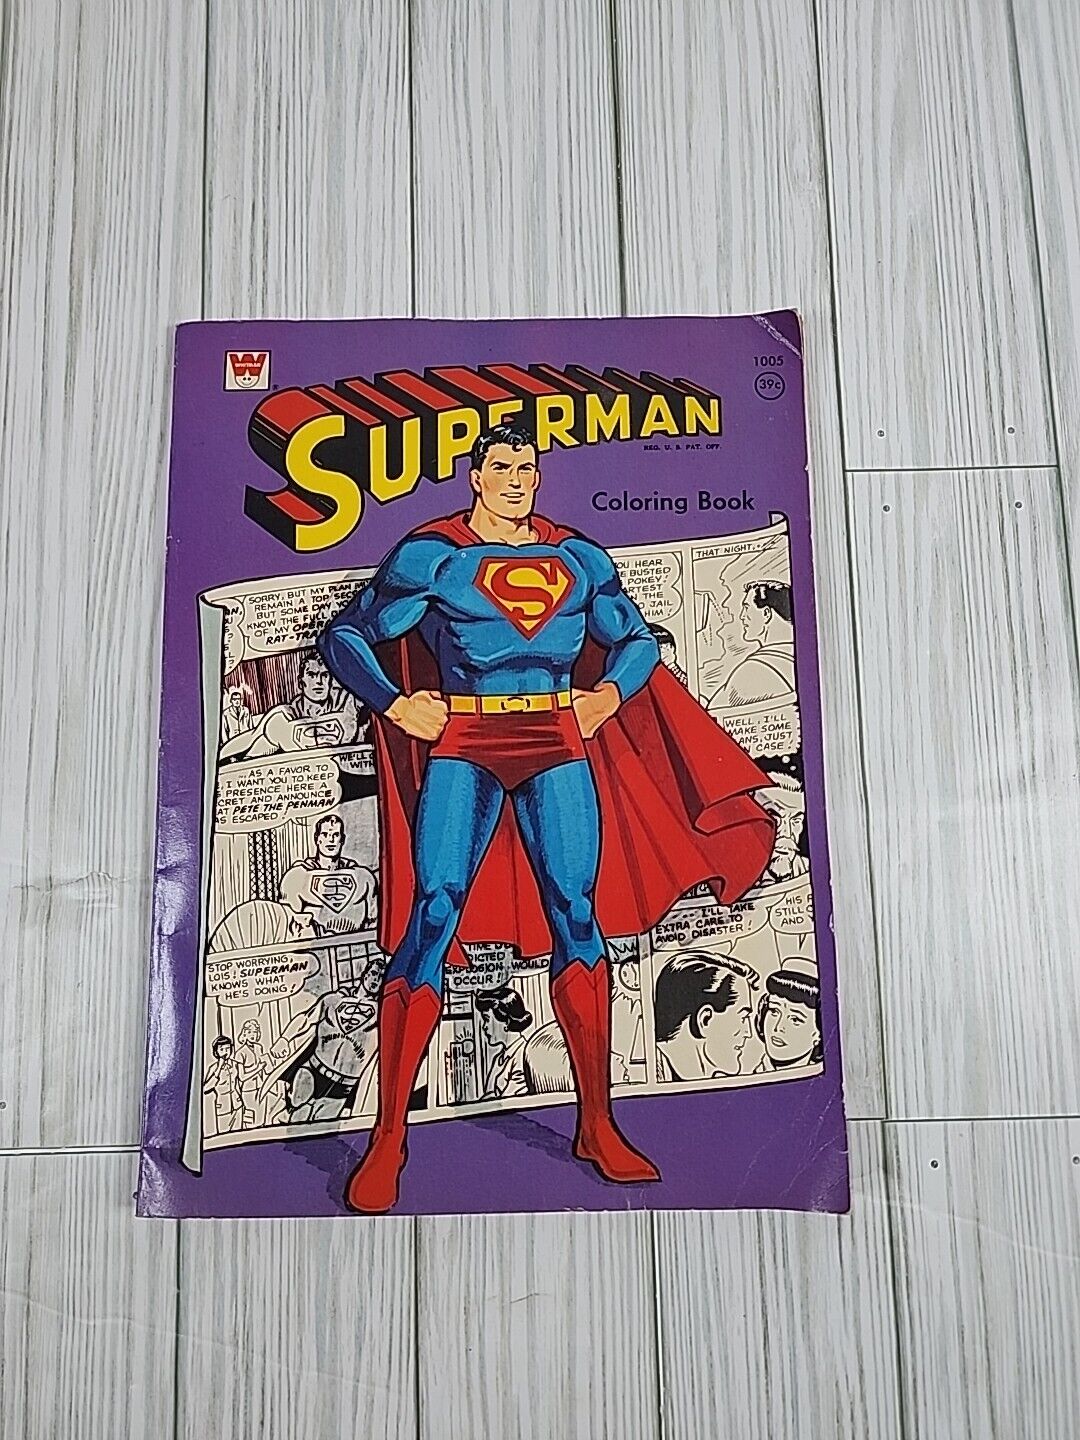 VINTAGE SUPERMAN COLORING BOOK MADE IN USA JUSTICE LEAGUE RARE NM 1966 Whitman